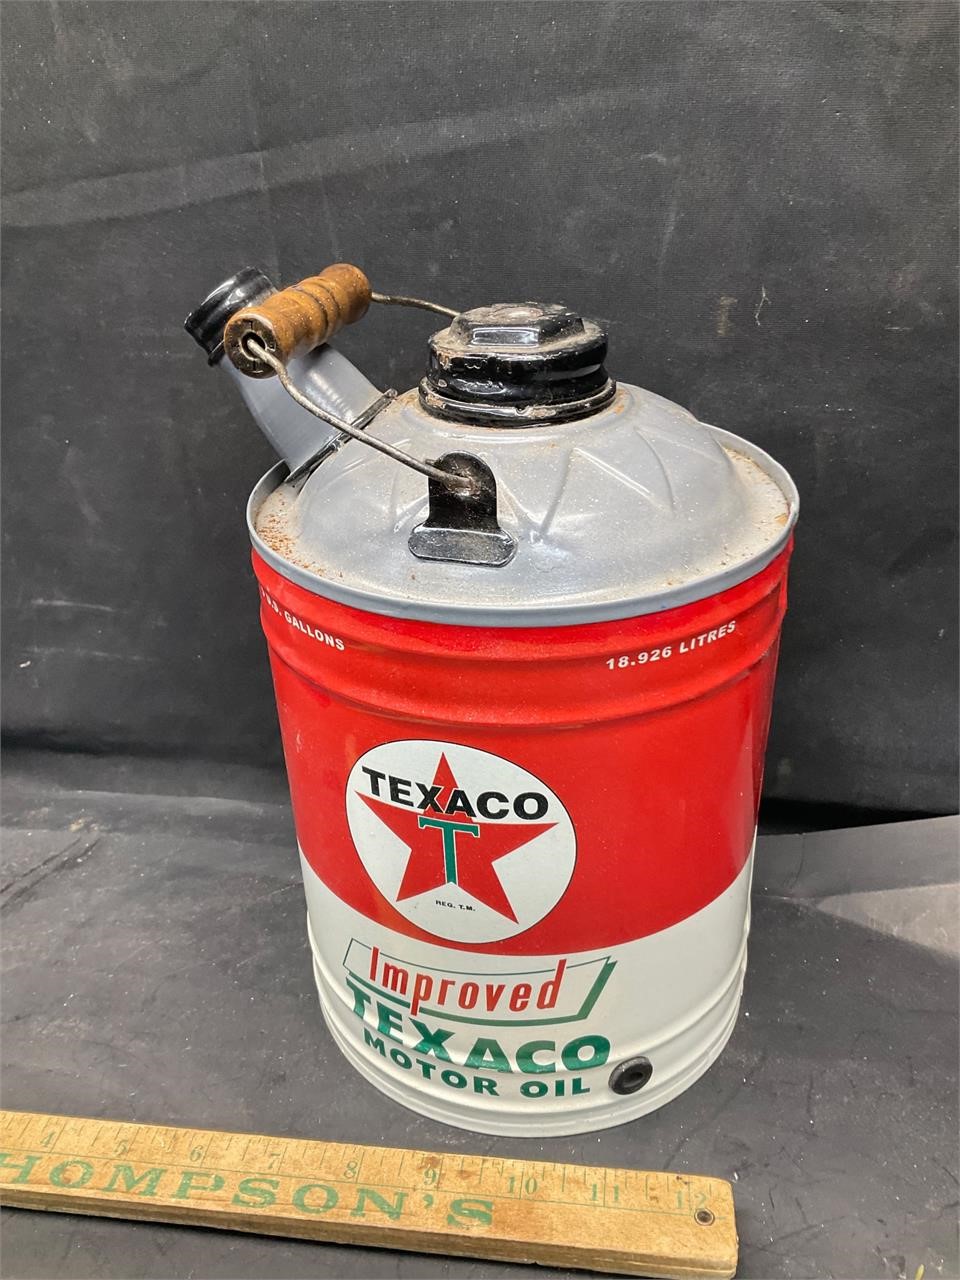 Texaco can was a lamp